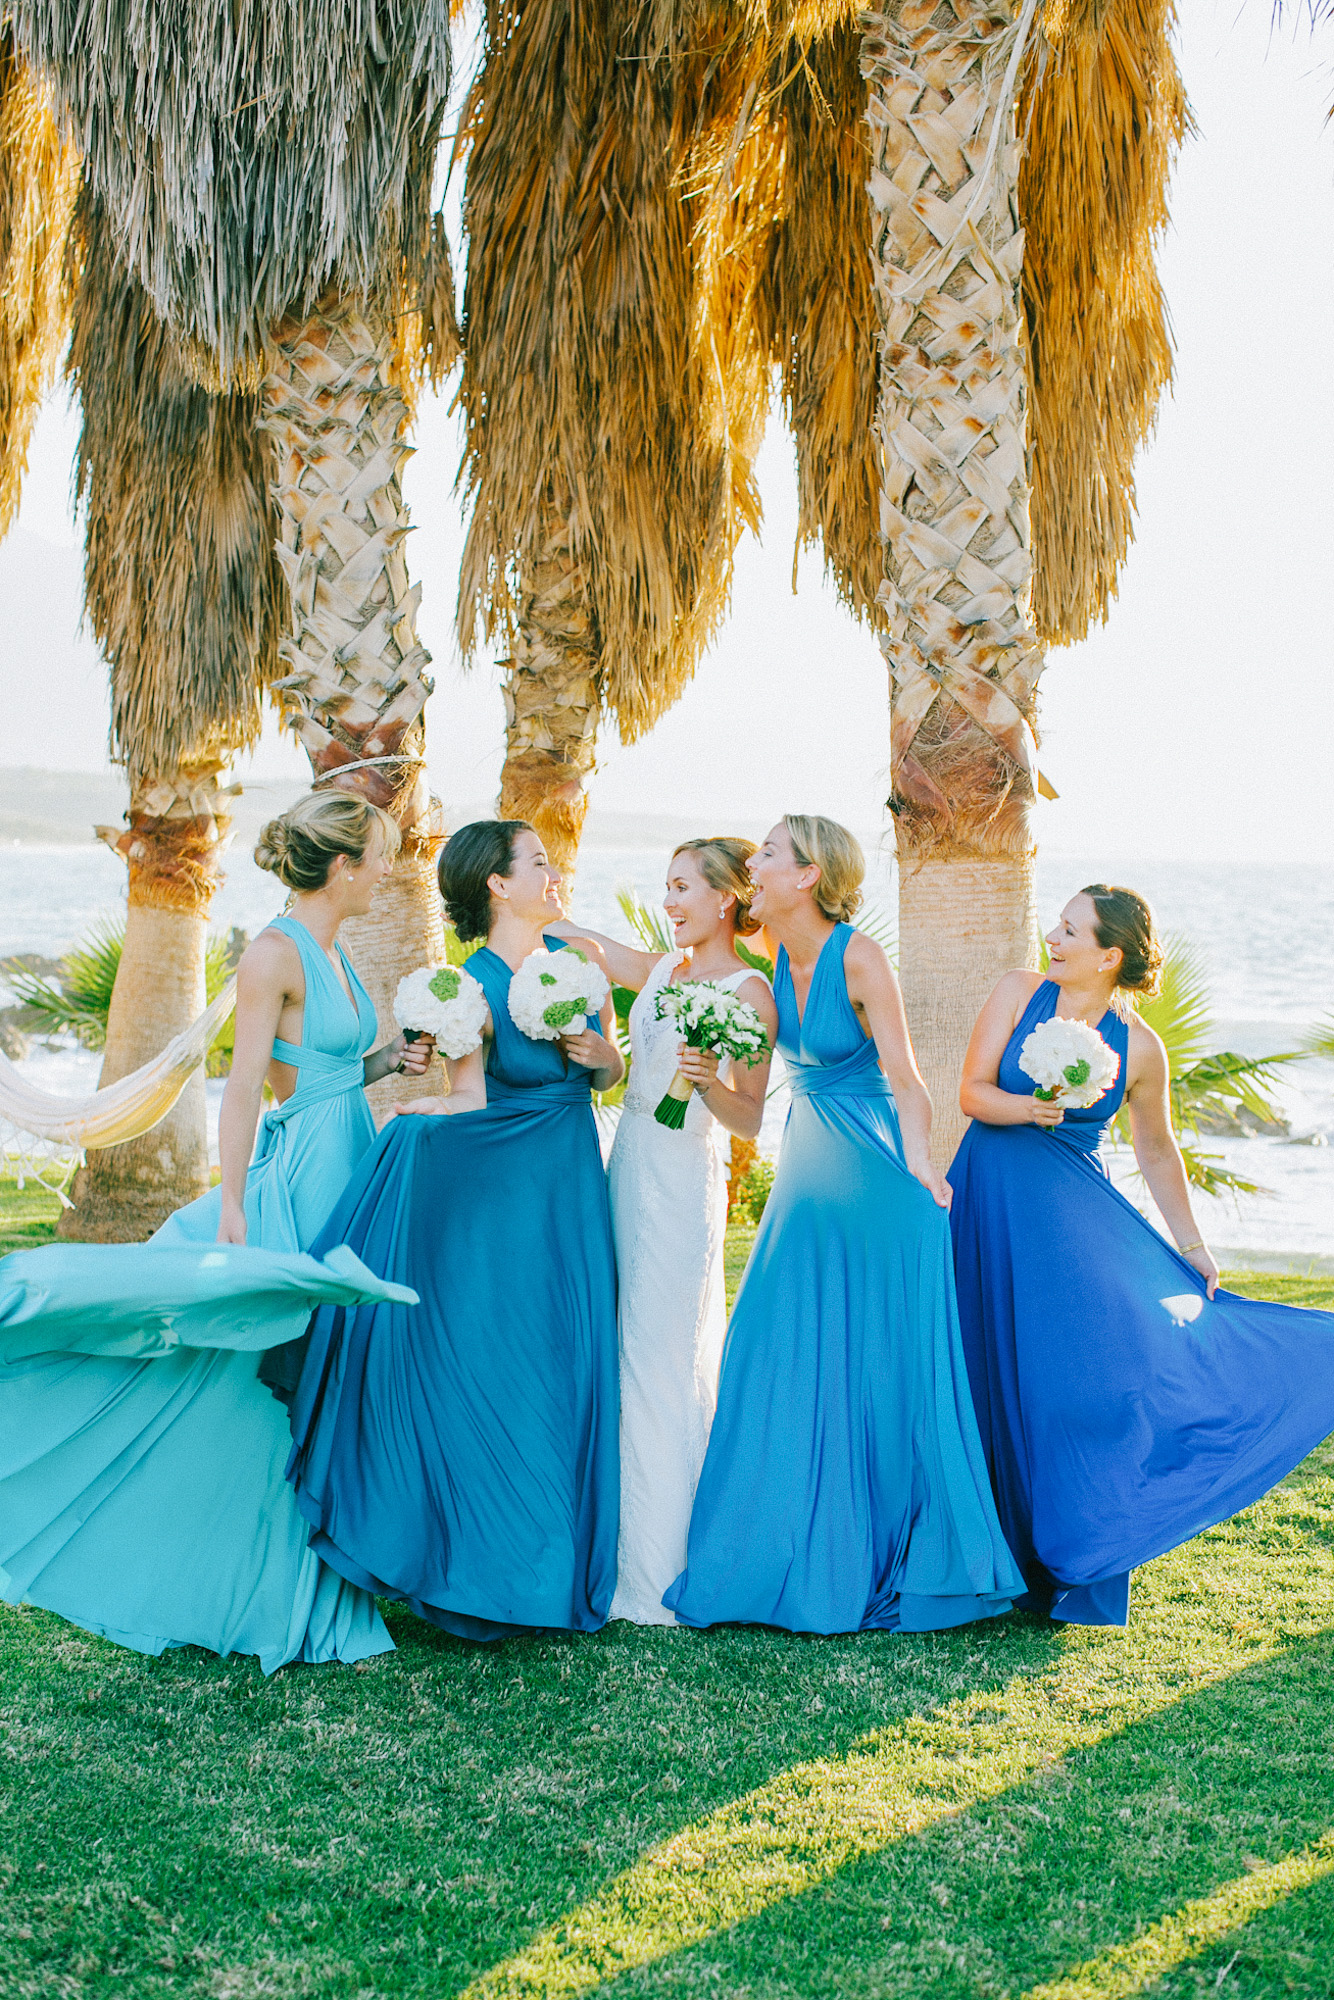 Wedding day portrait of bride and bridesmaids having fun after the wedding ceremony wearing white Pronovias bridal dress and blue mismatched dresses by Two Birds bridal boutique and holding flower bouquets.